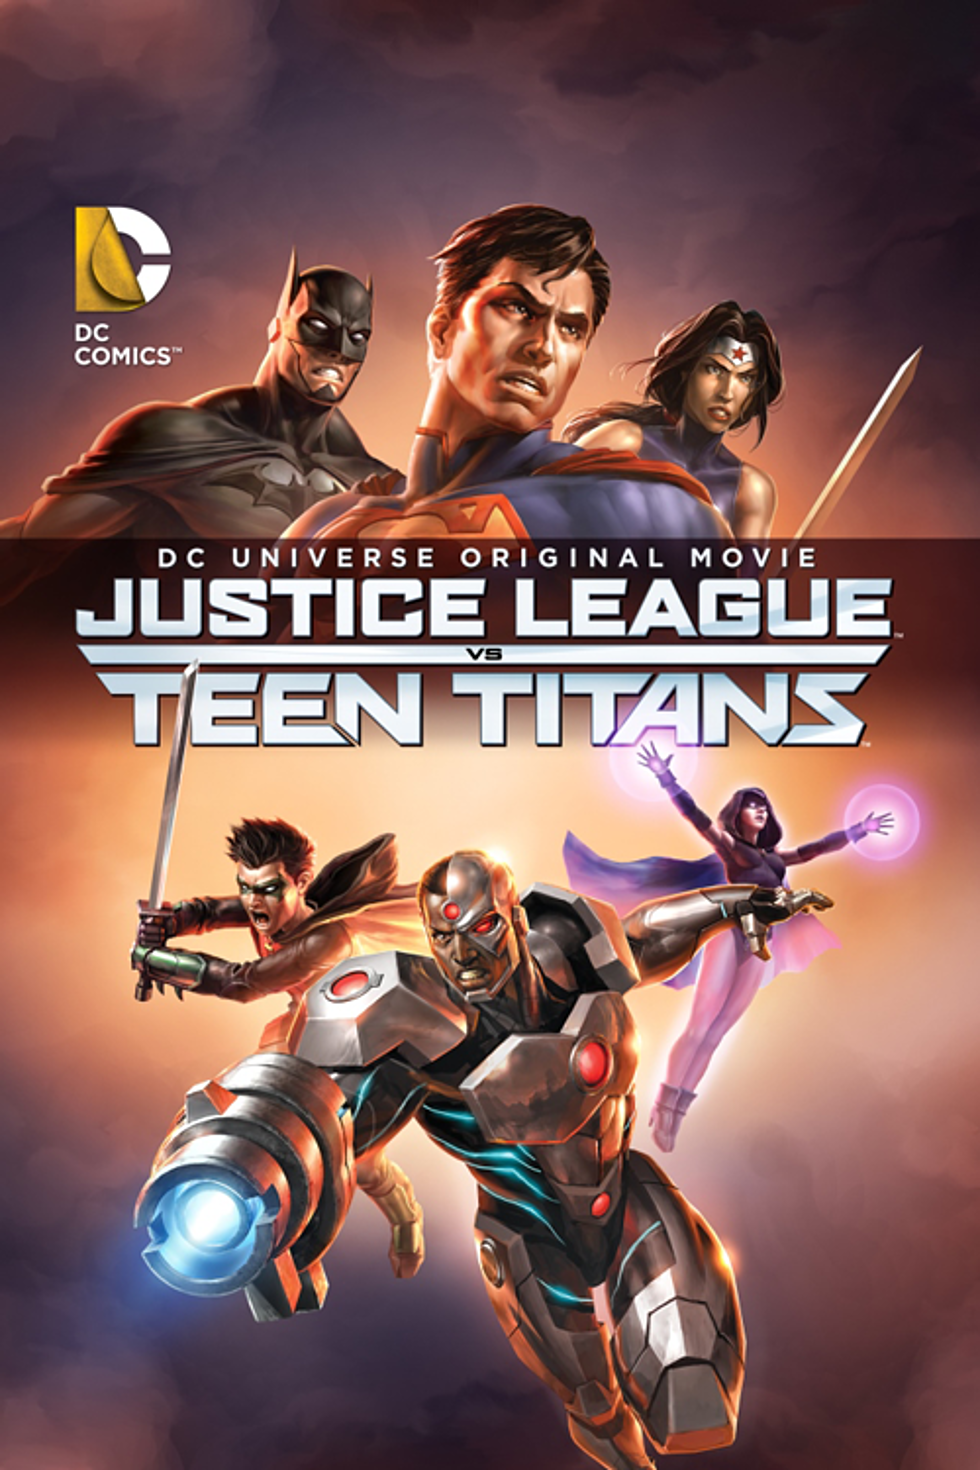 Win Subway or ‘Justice League vs. Teen Titans’ from Power 96